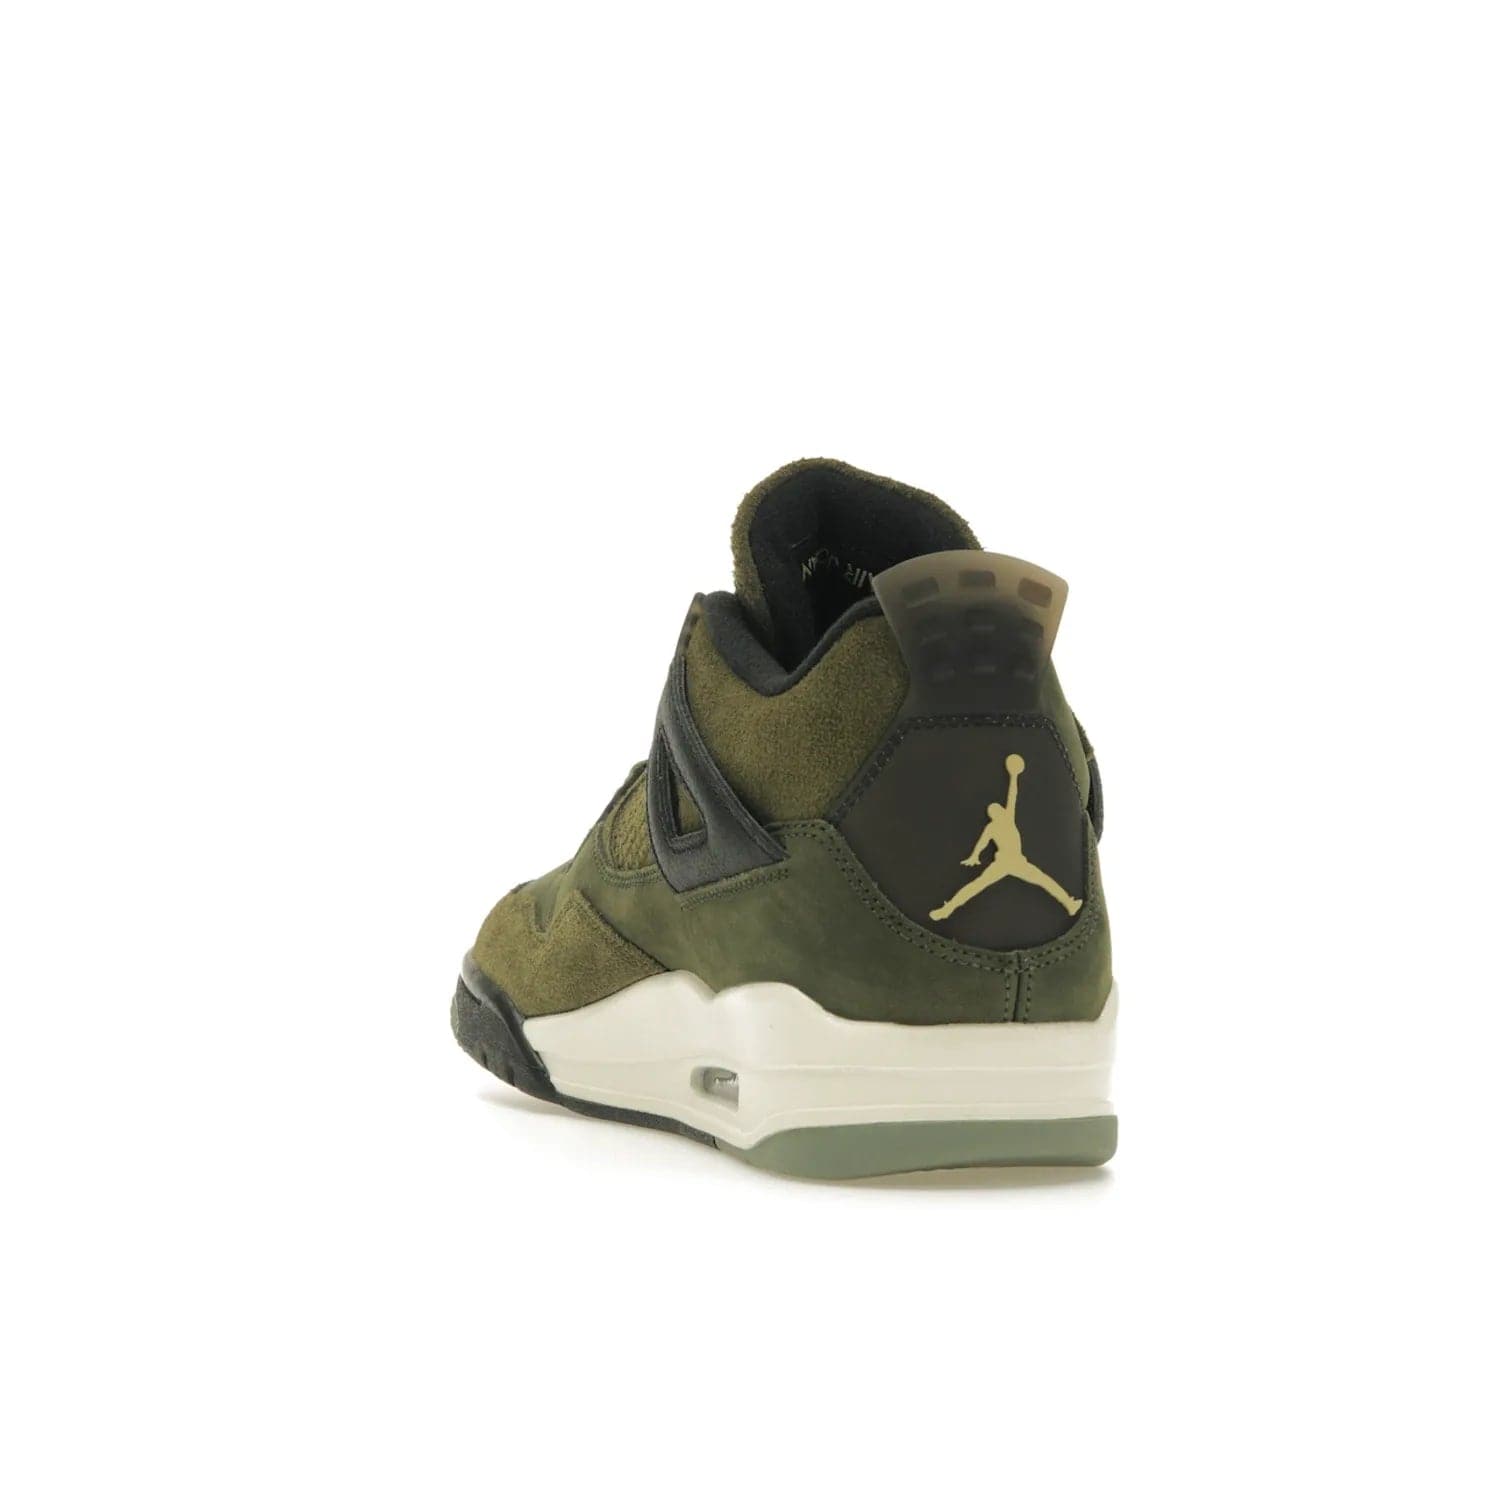 Jordan 4 Retro SE Craft Medium Olive - Image 26 - Only at www.BallersClubKickz.com - Grab the Jordan 4 Retro SE Crafts for a unique style. Combines Medium Olive, Pale Vanilla, Khaki, Black and Sail, with same classic shape, cushioning, and rubber outsole. Available on November 18th!